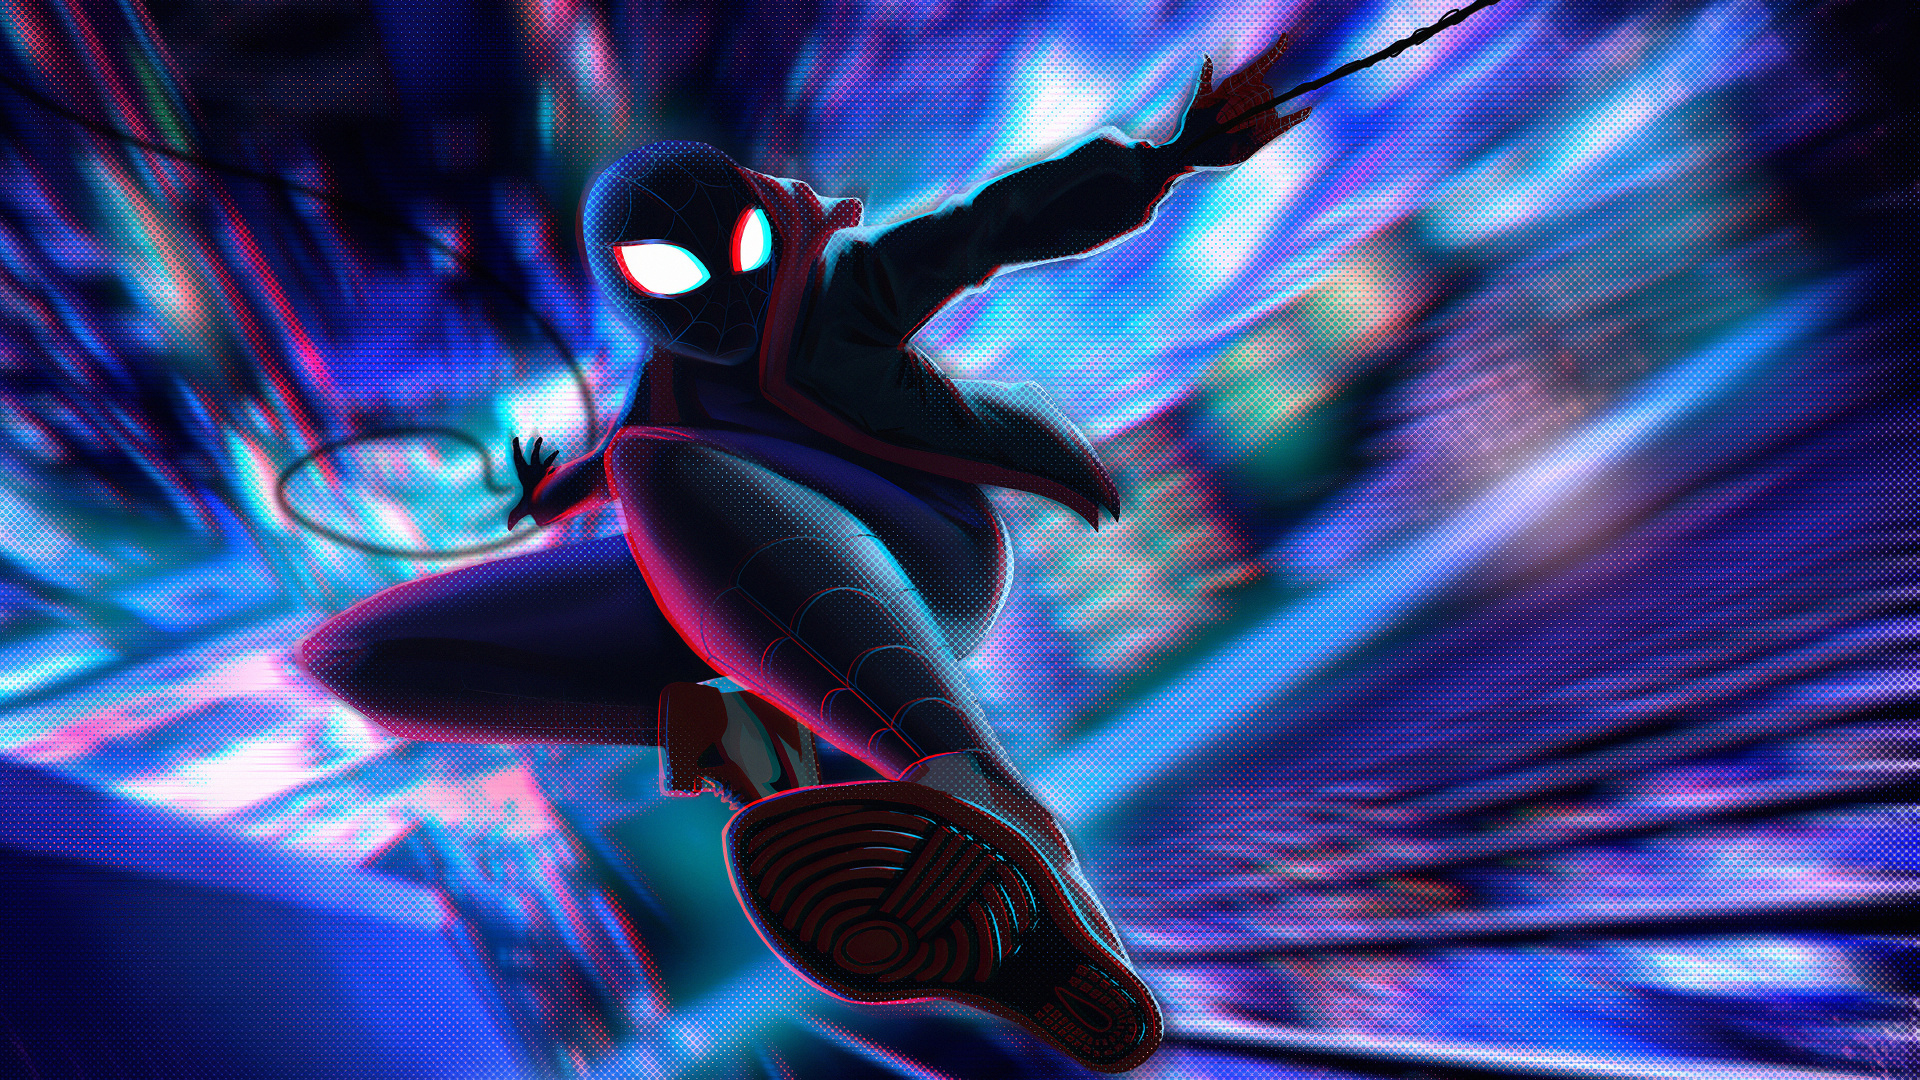 Miles Morales, Spider-man, Performance, Purple, Performing Arts. Wallpaper in 1920x1080 Resolution